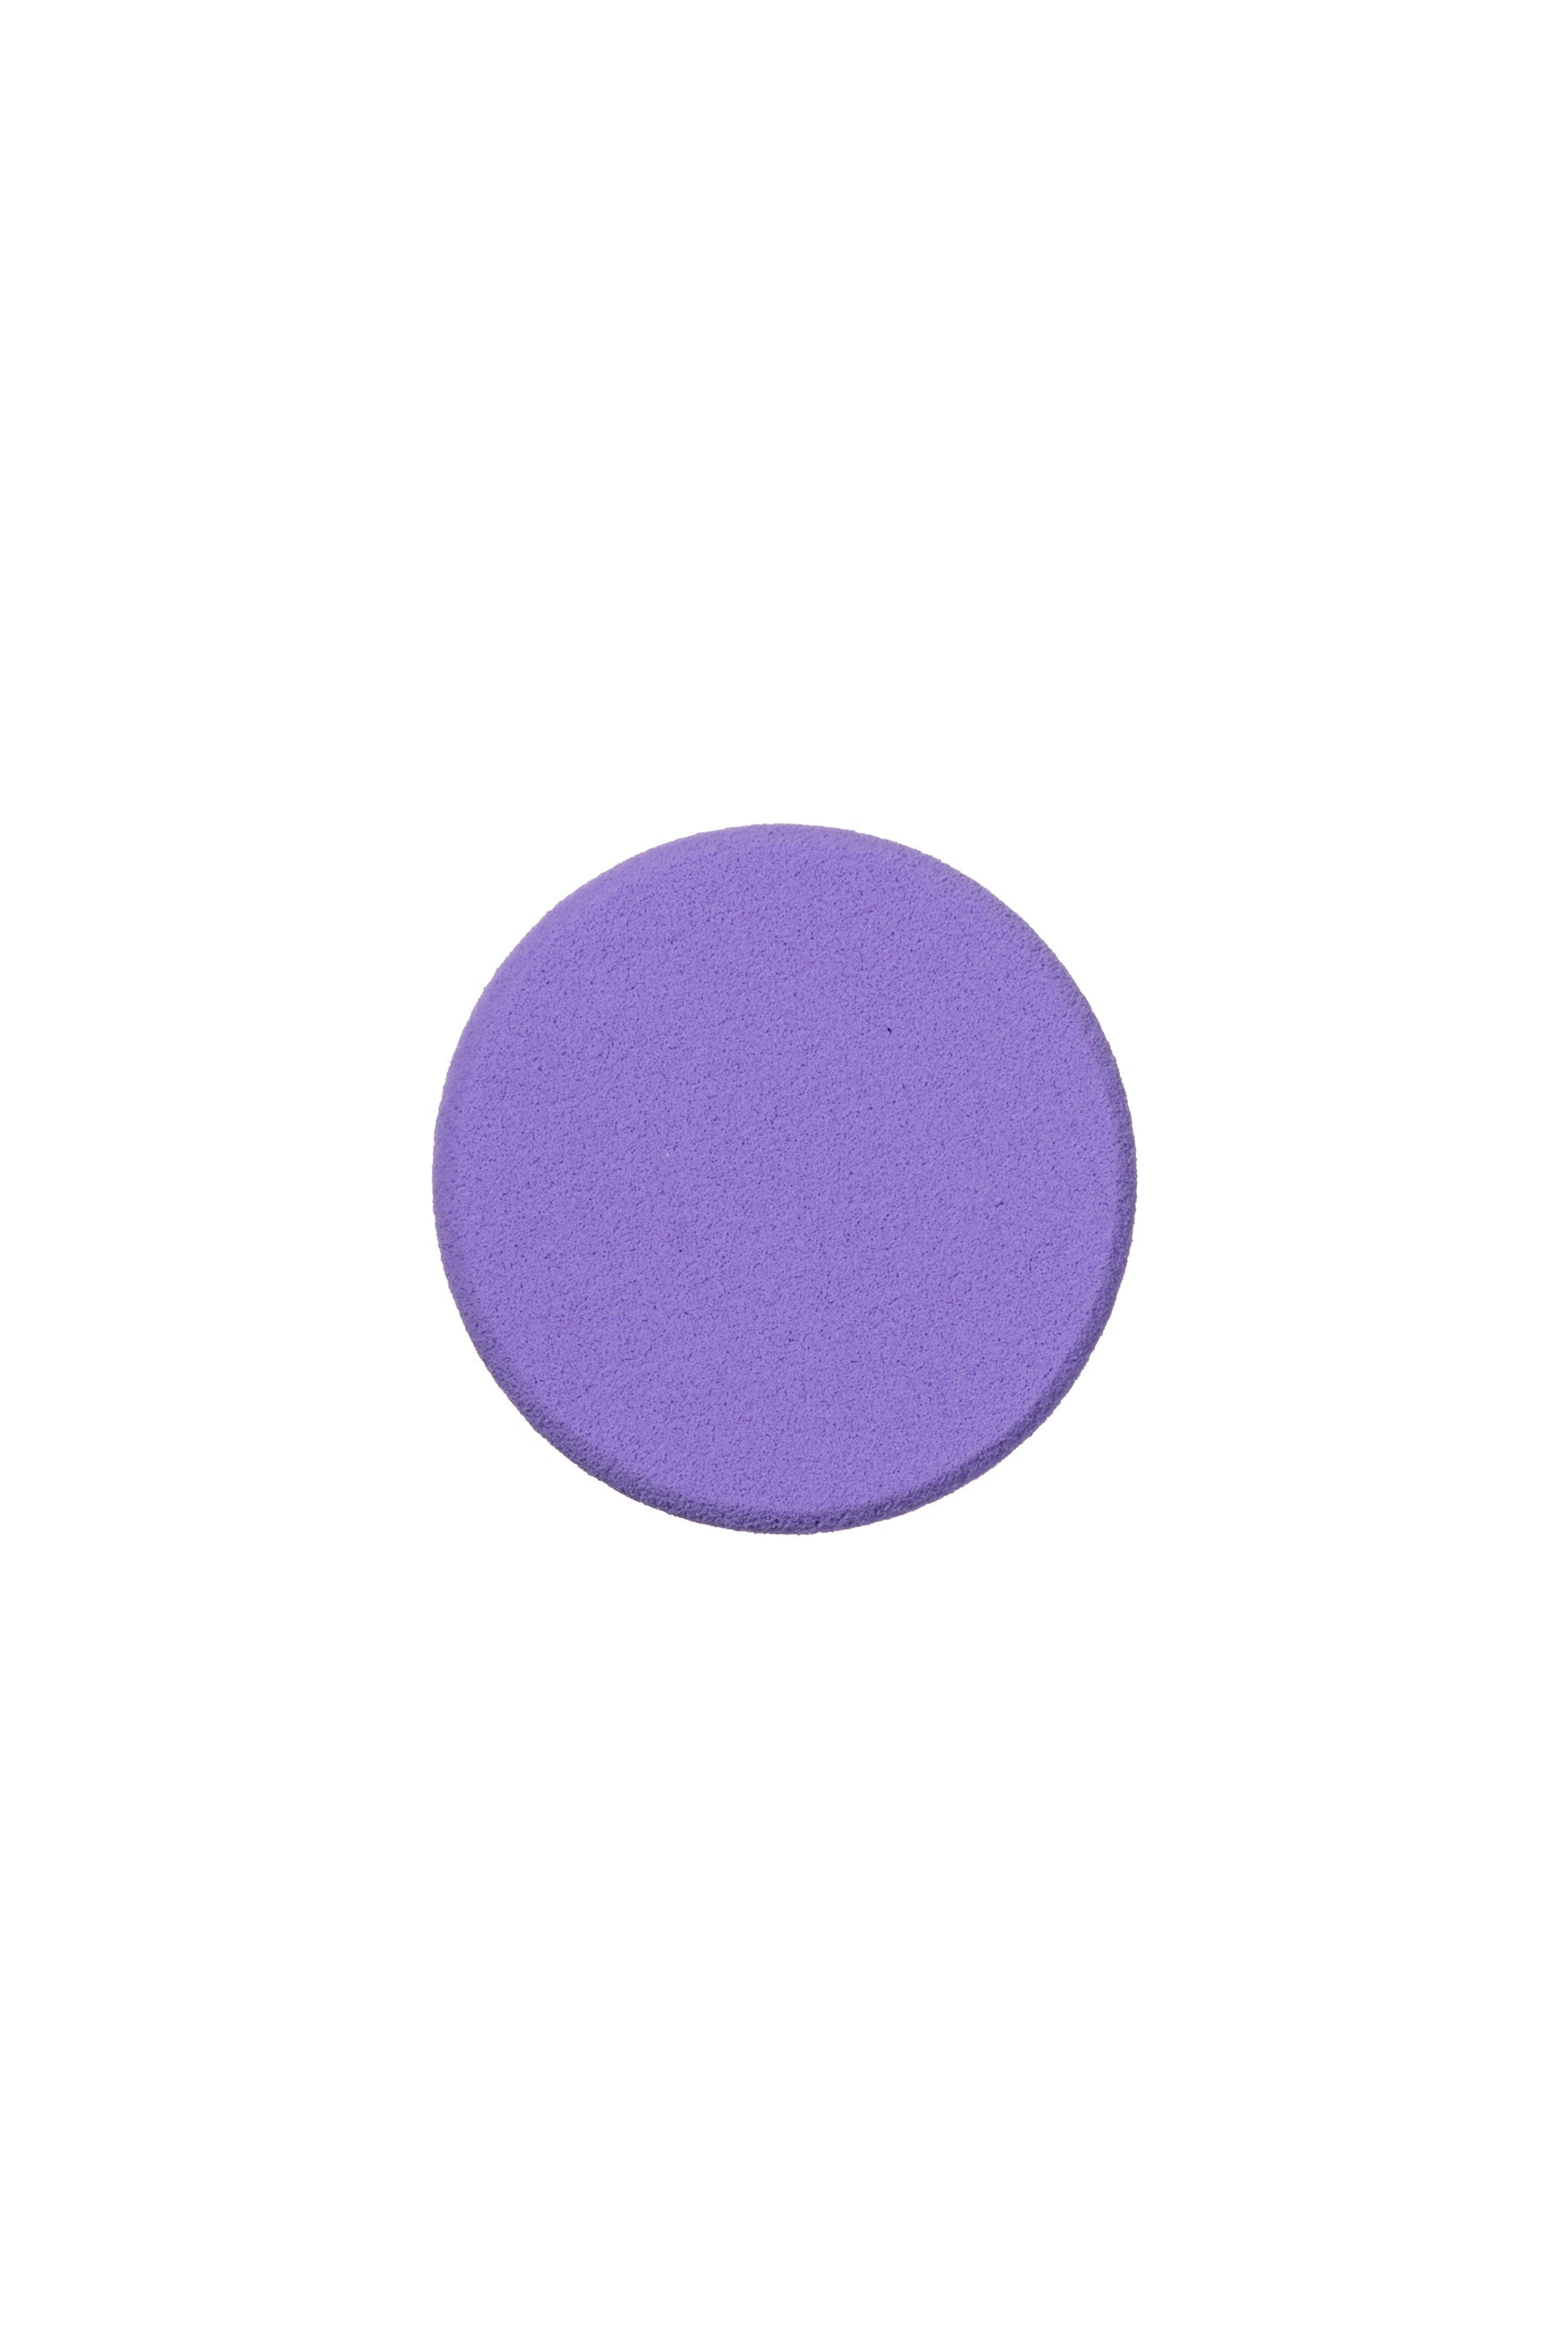 The Anna Sui Makeup violet sponge is an ultra-soft, high-definition cosmetic sponge applicator